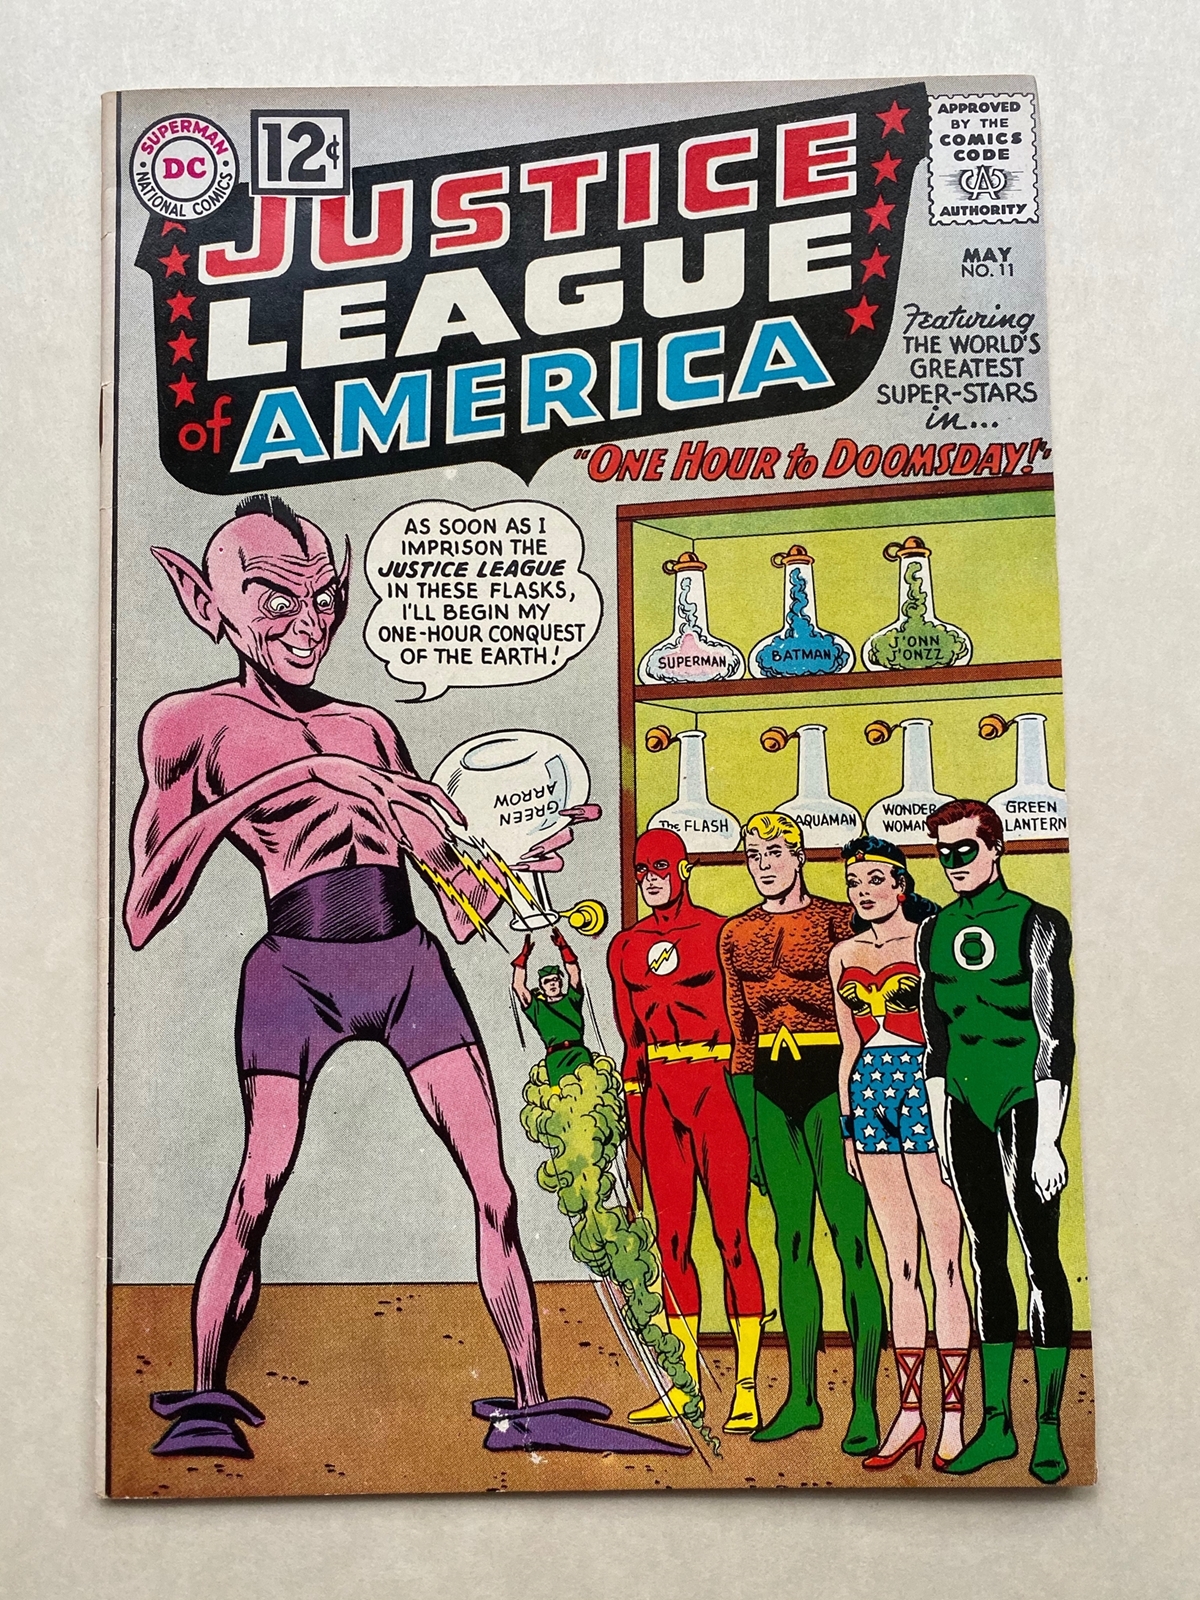 JUSTICE LEAGUE OF AMERICA #11 - (1962 - DC) VFN (Cents Copy) - Featuring Wonder Woman, Flash,